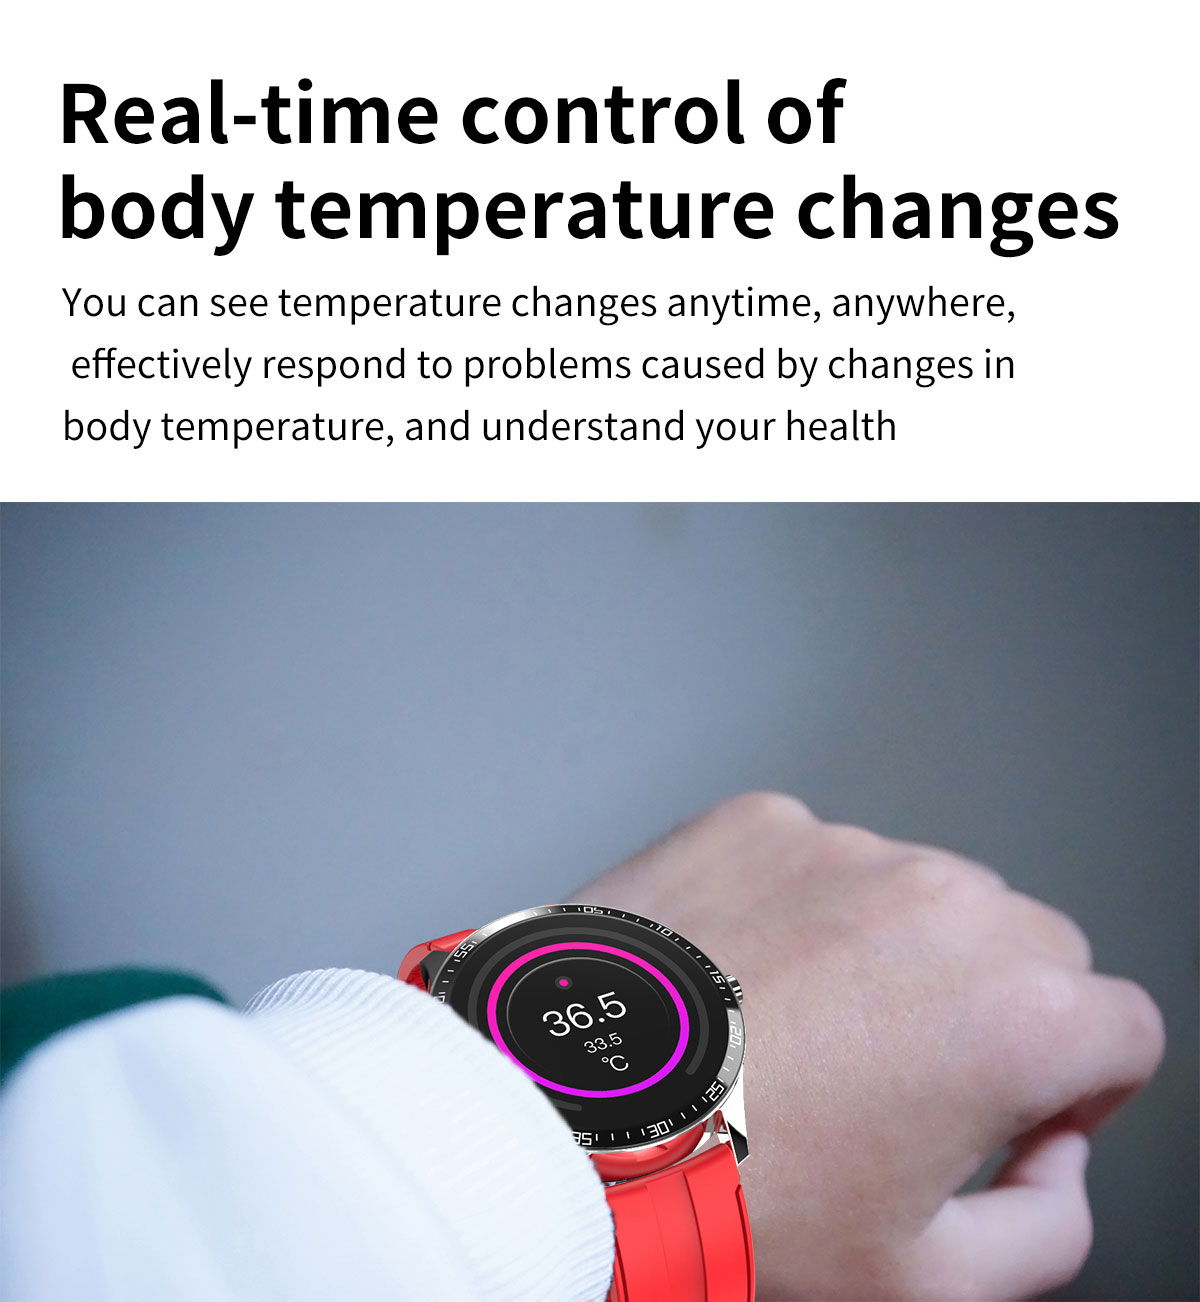 [bluetooth Call]SENBONO S82 Body Temperature Measurement Heart Rate Blood Pressure Monitor Weather Display Smart Watch